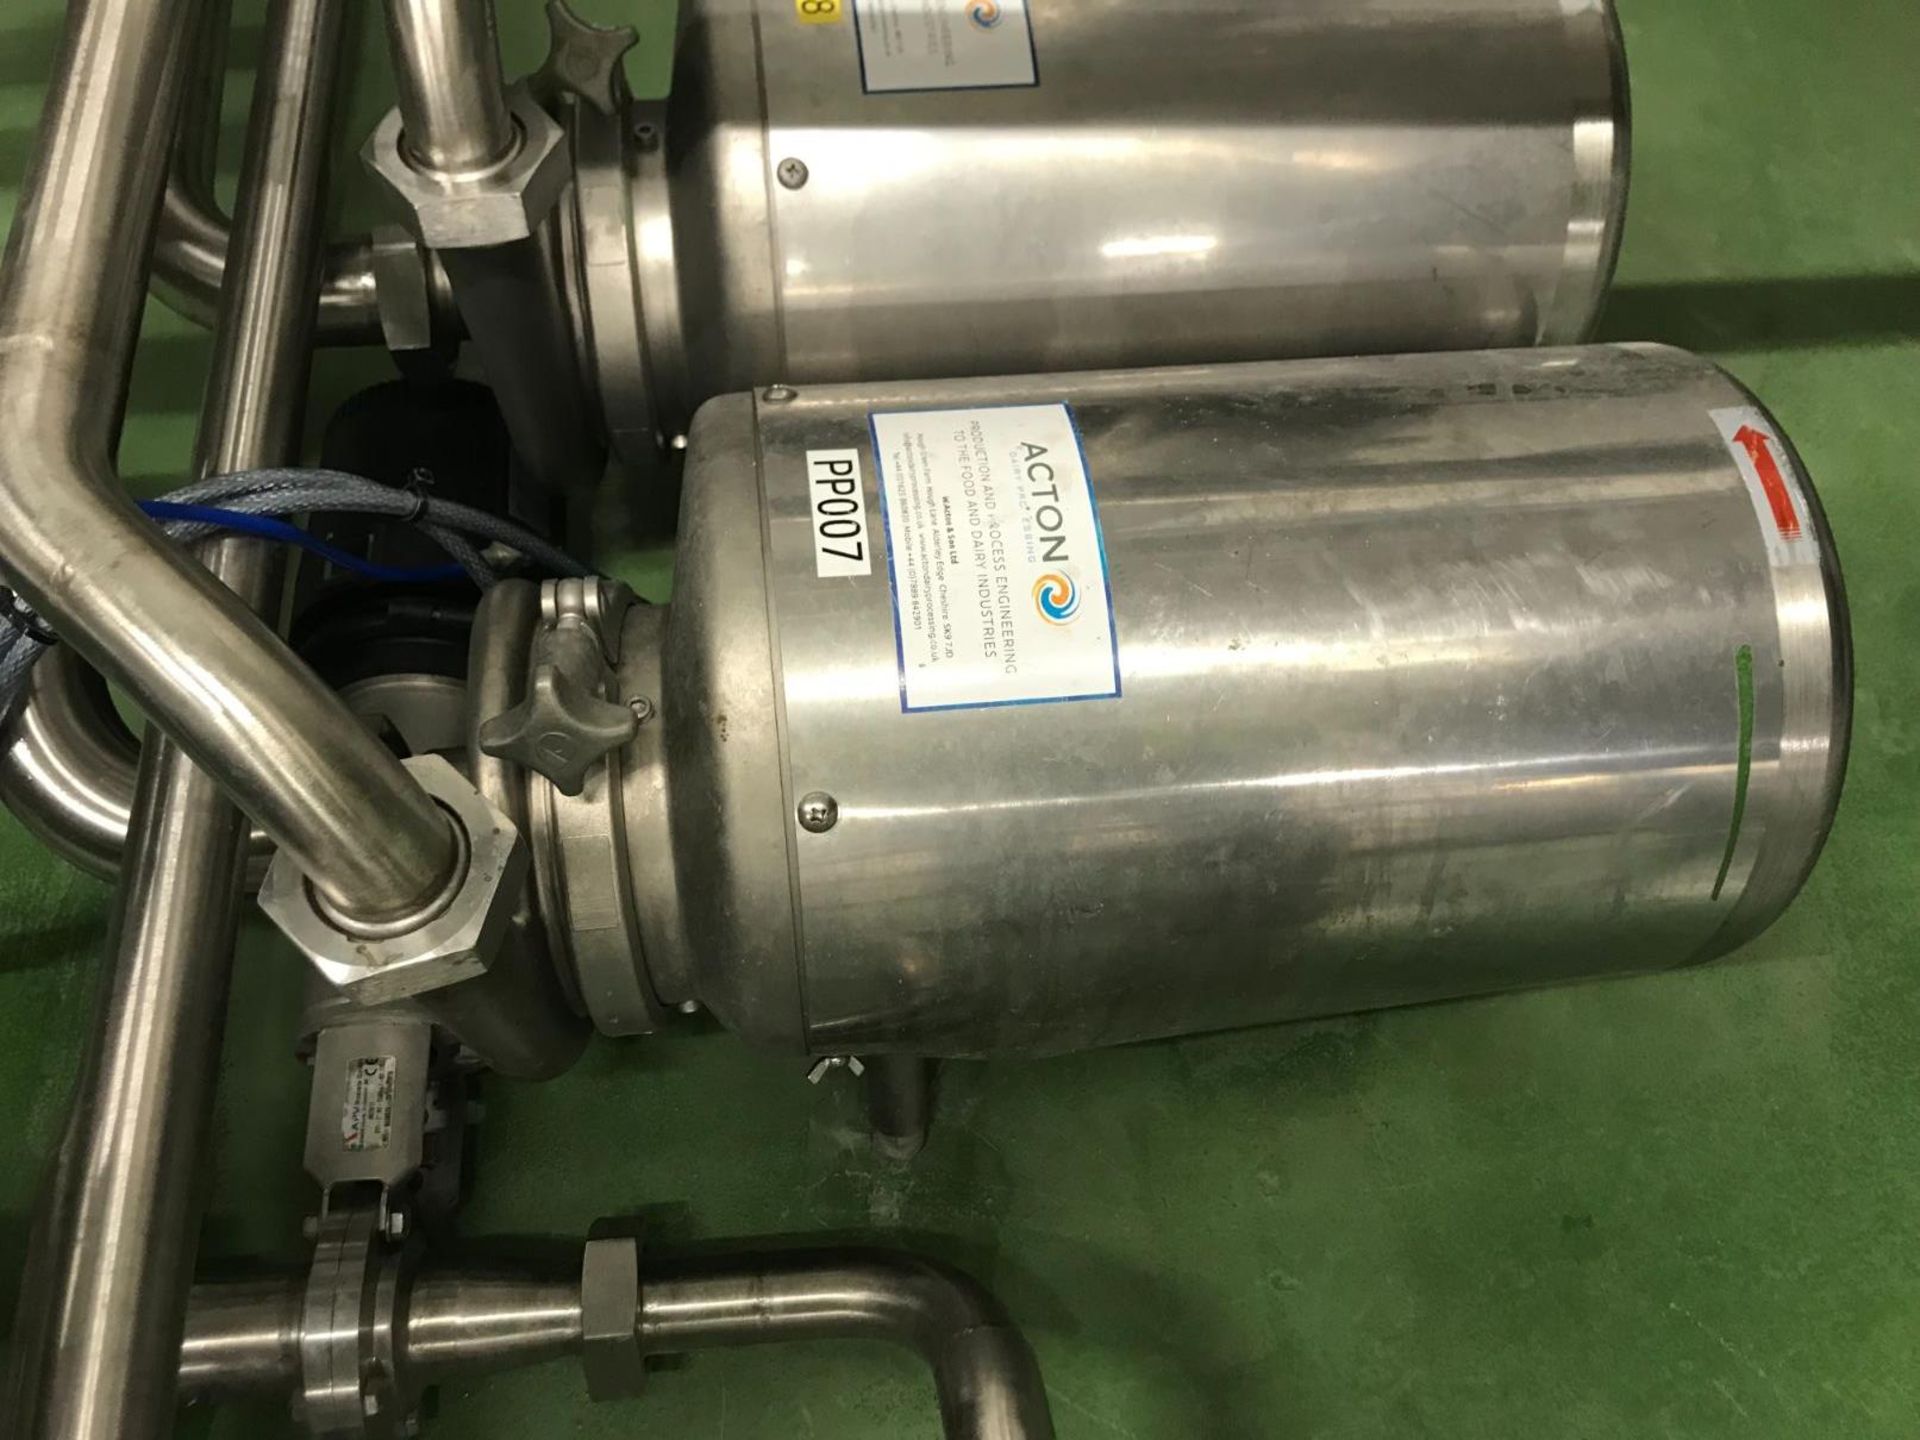 Acton stainless steel cetrifugal pump. Ref: PP007 - Image 3 of 3